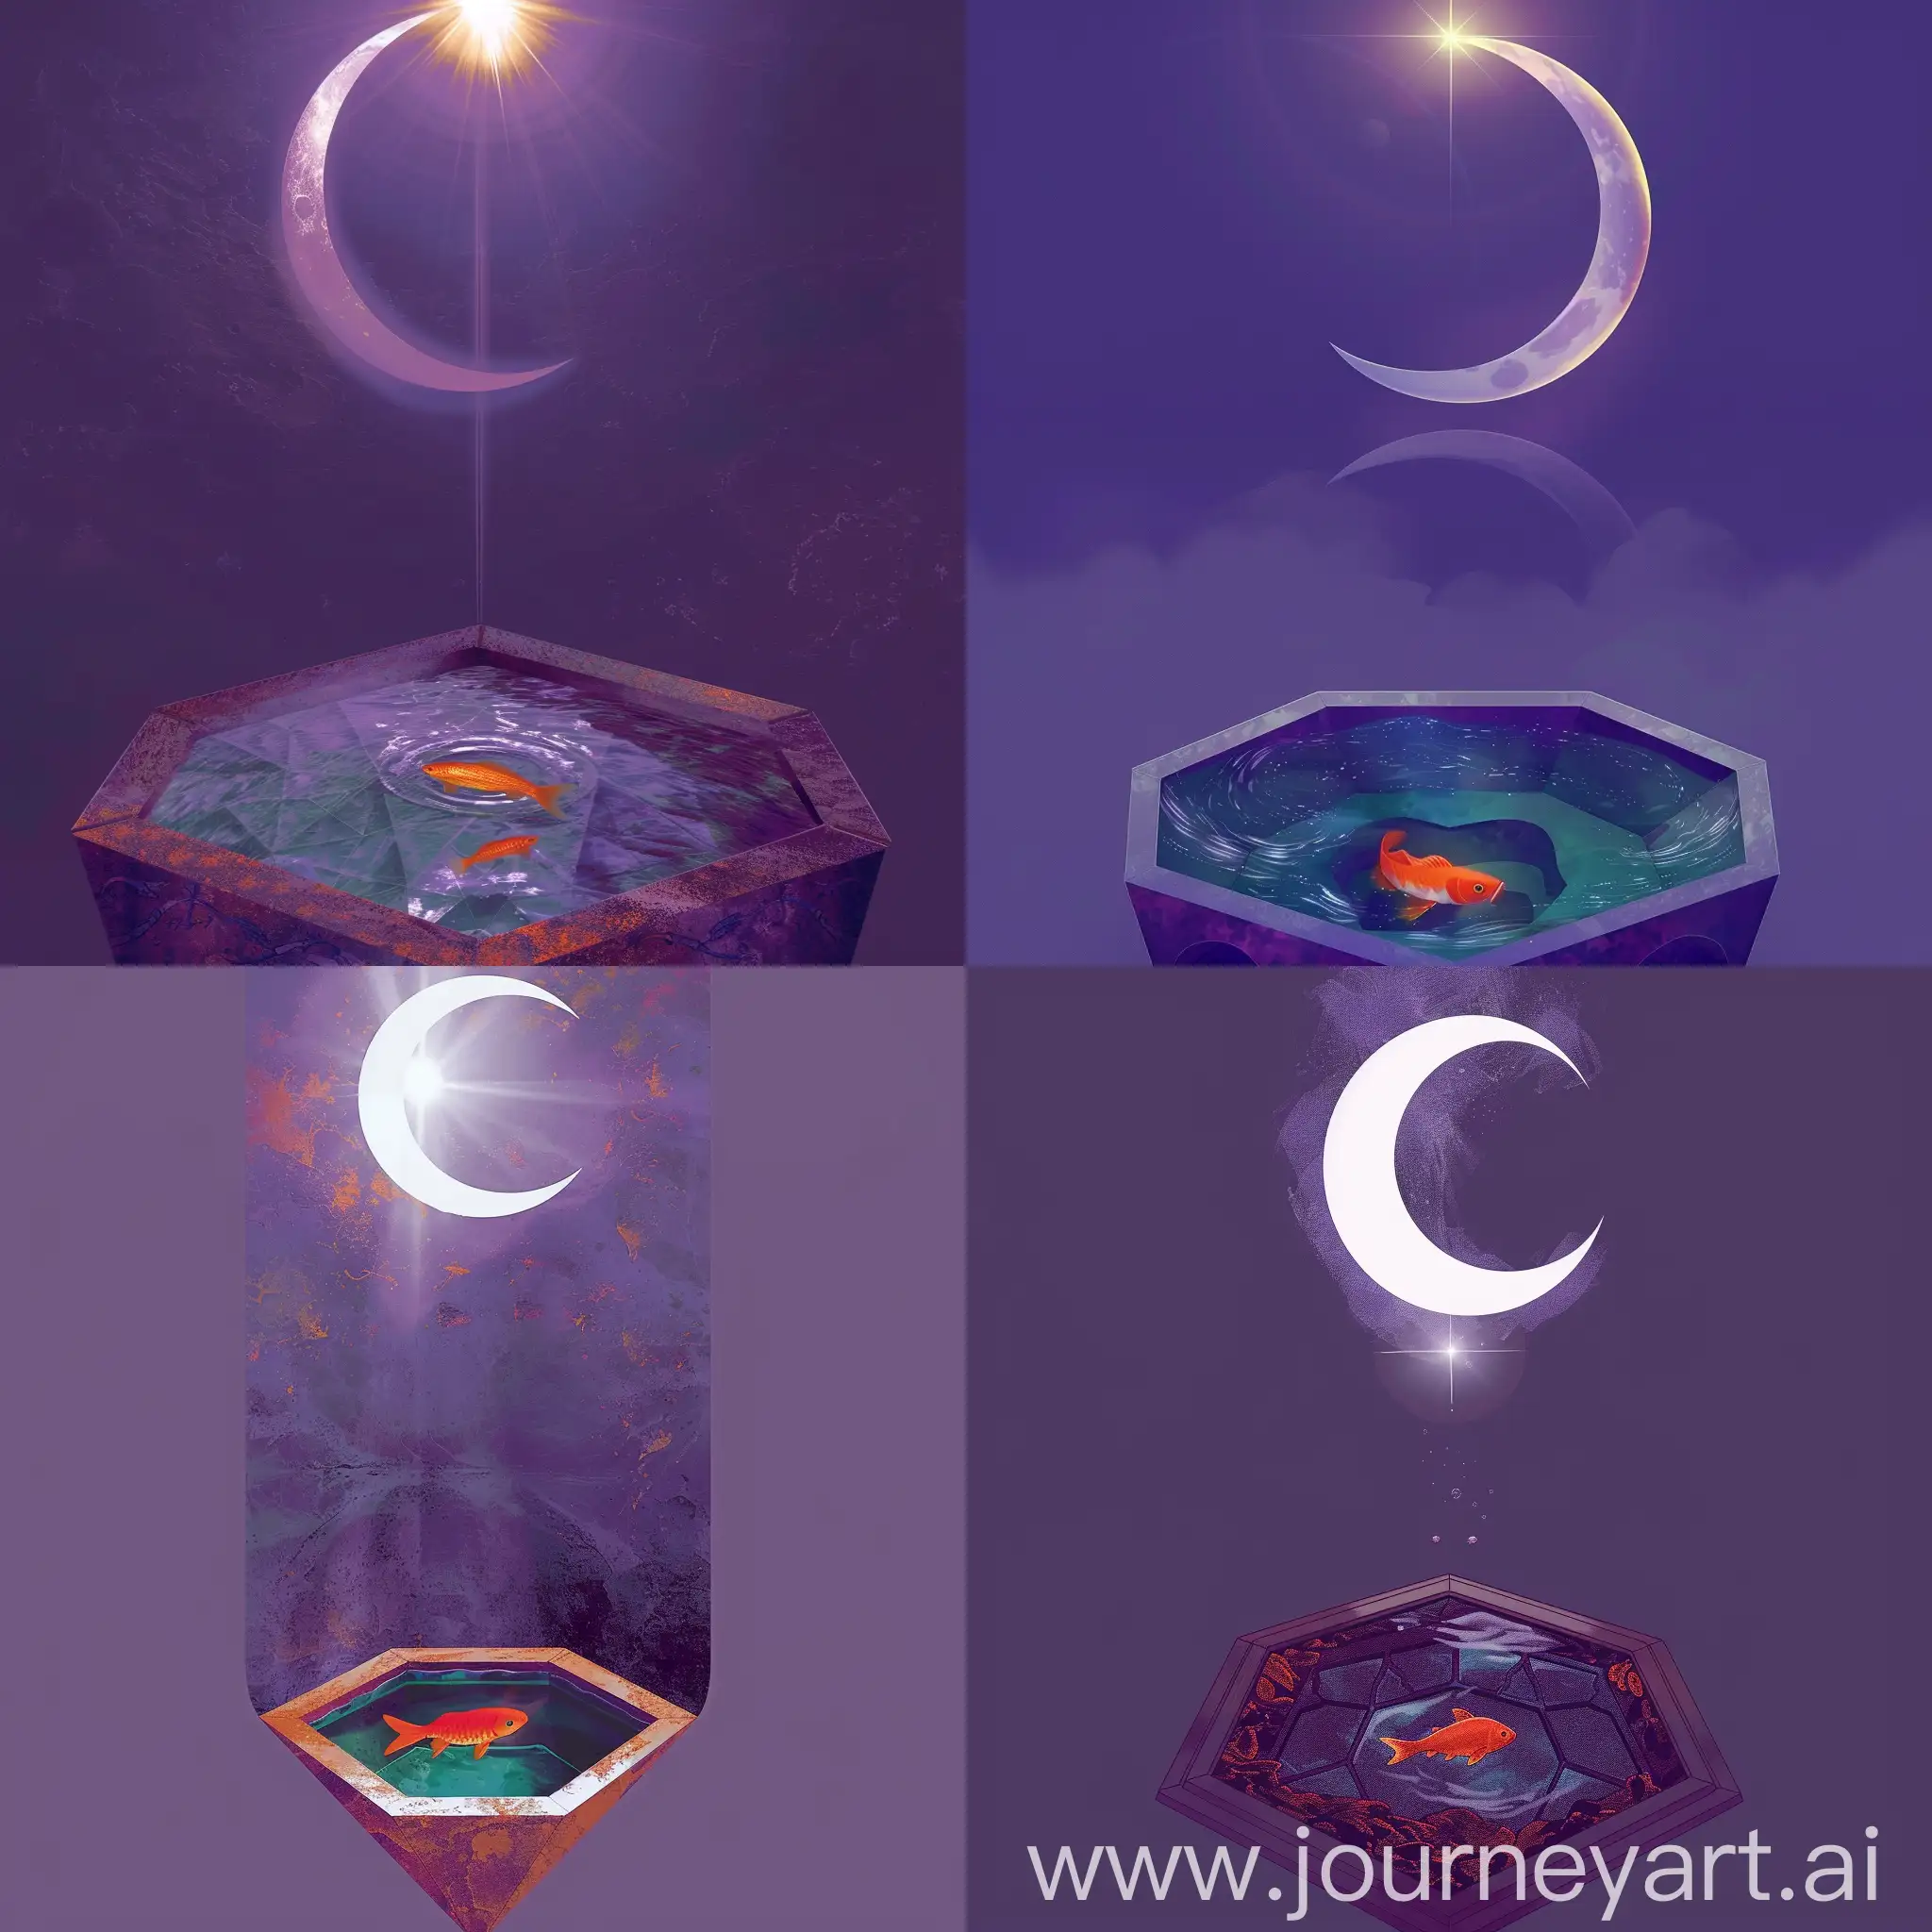 Iranian-Pentagonal-Pool-with-Crescent-Moon-Reflection